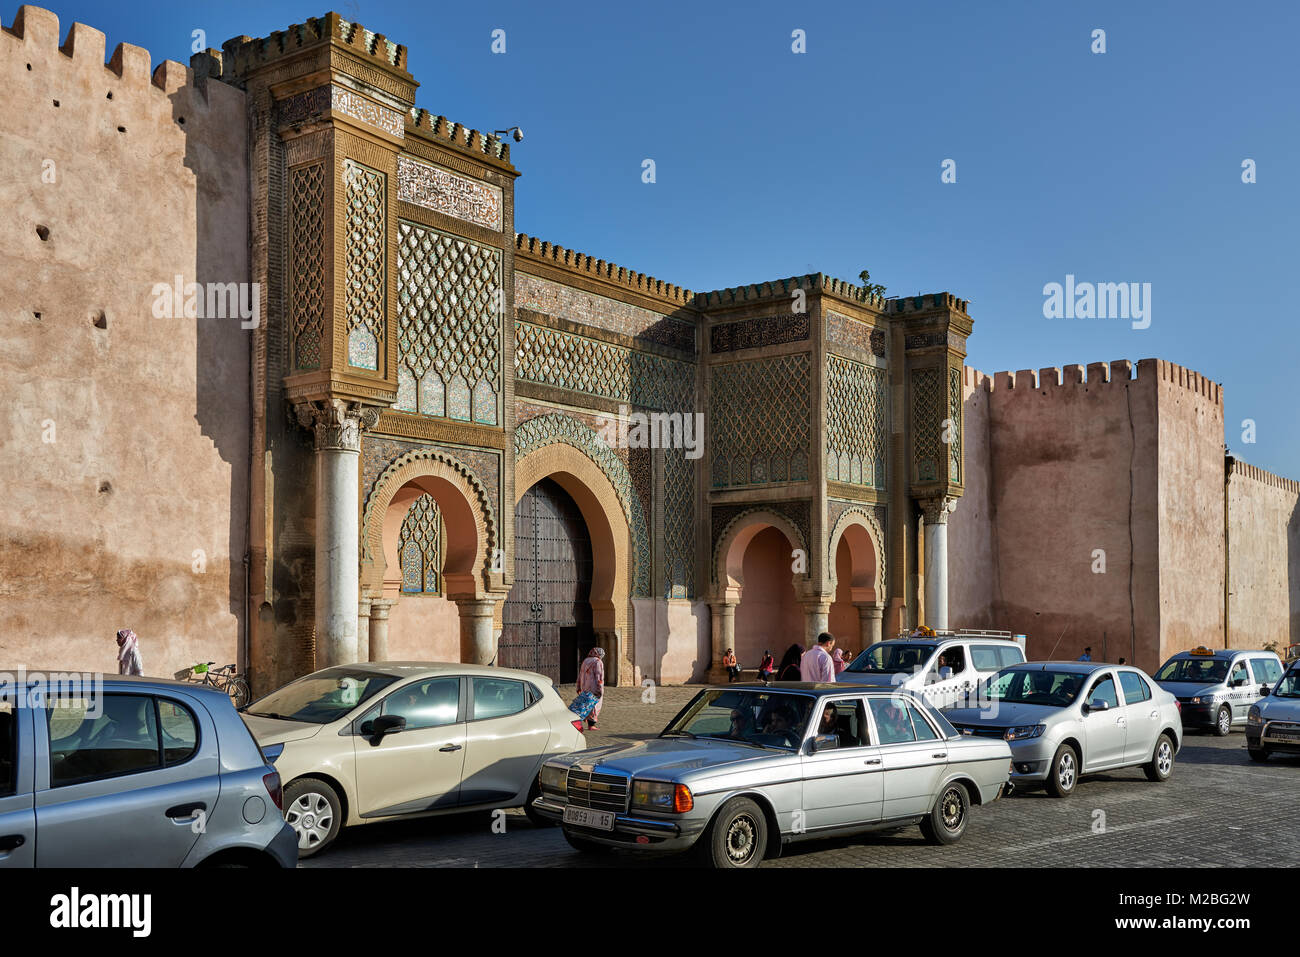 Bab Mansour city gate, Meknes, Morocco, Africa Stock Photo